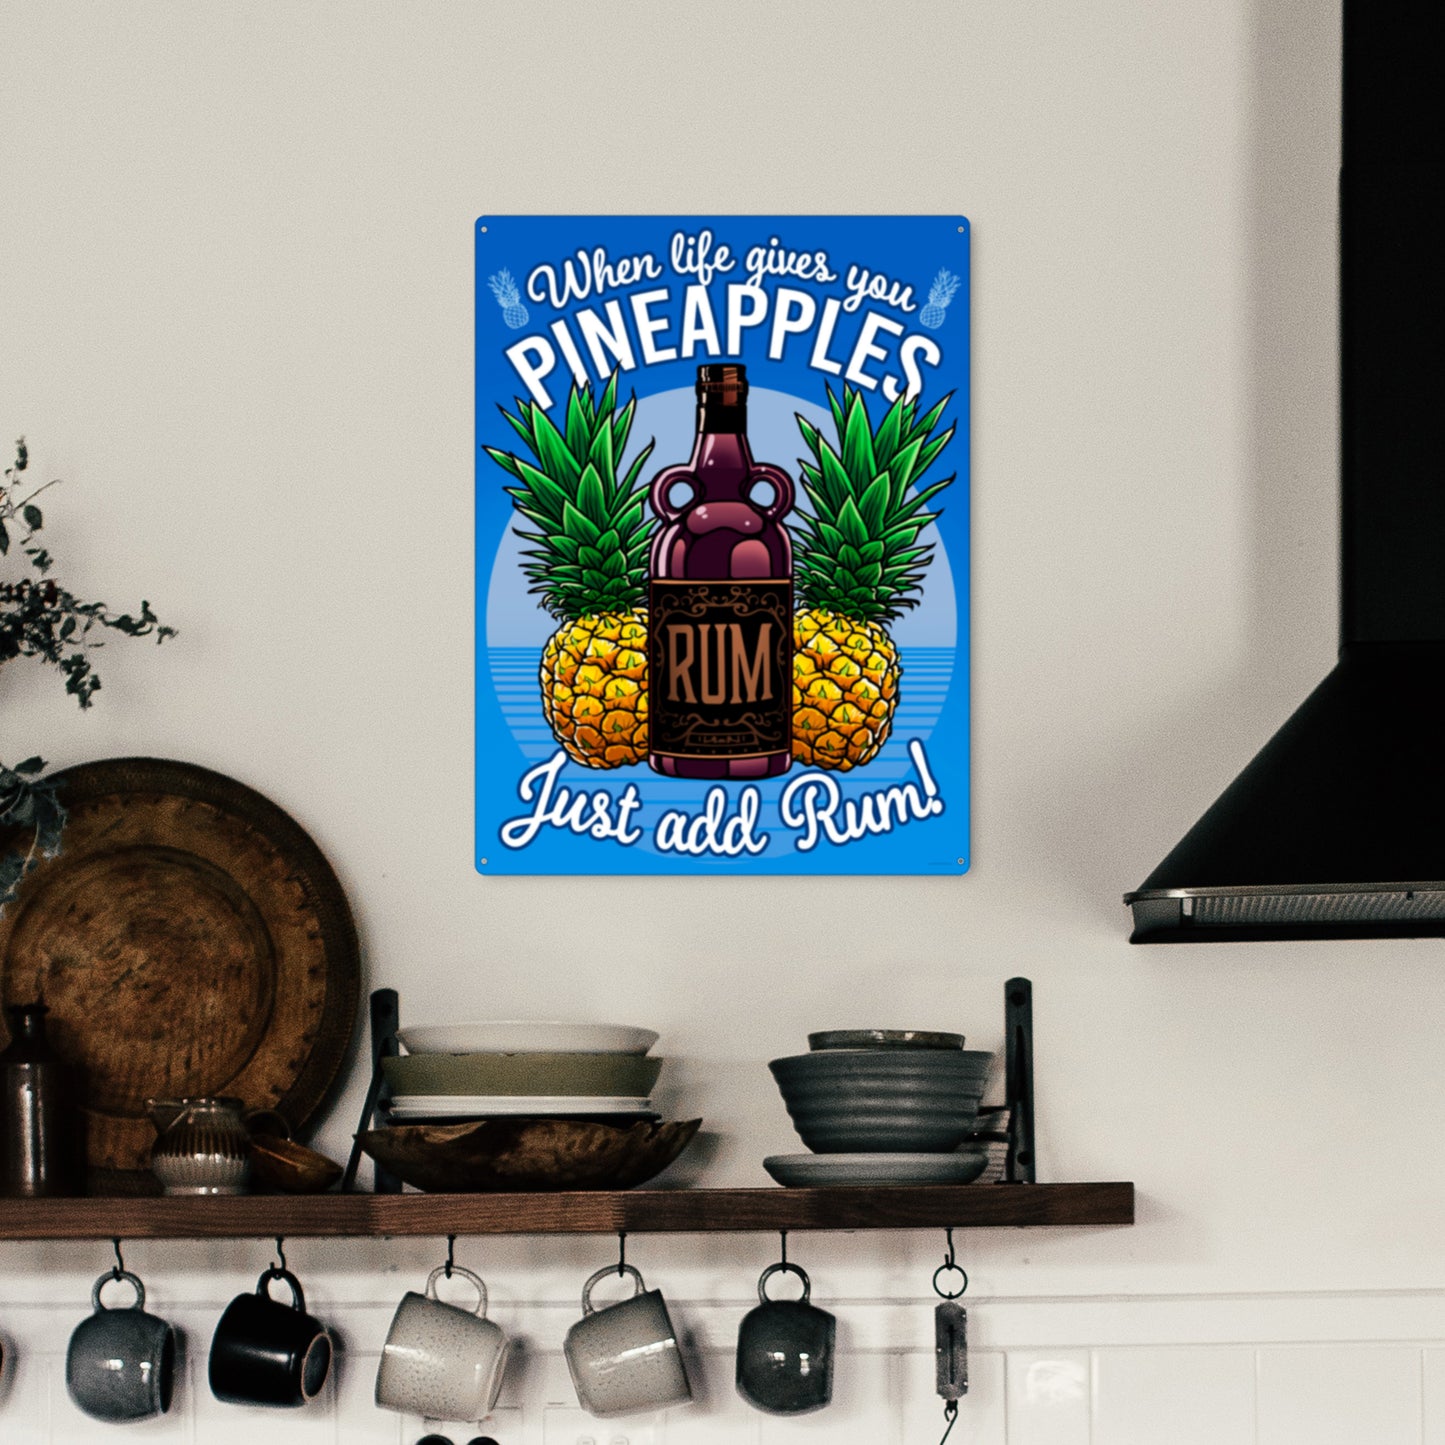 When Life Gives You Pineapples Just Add Rum!